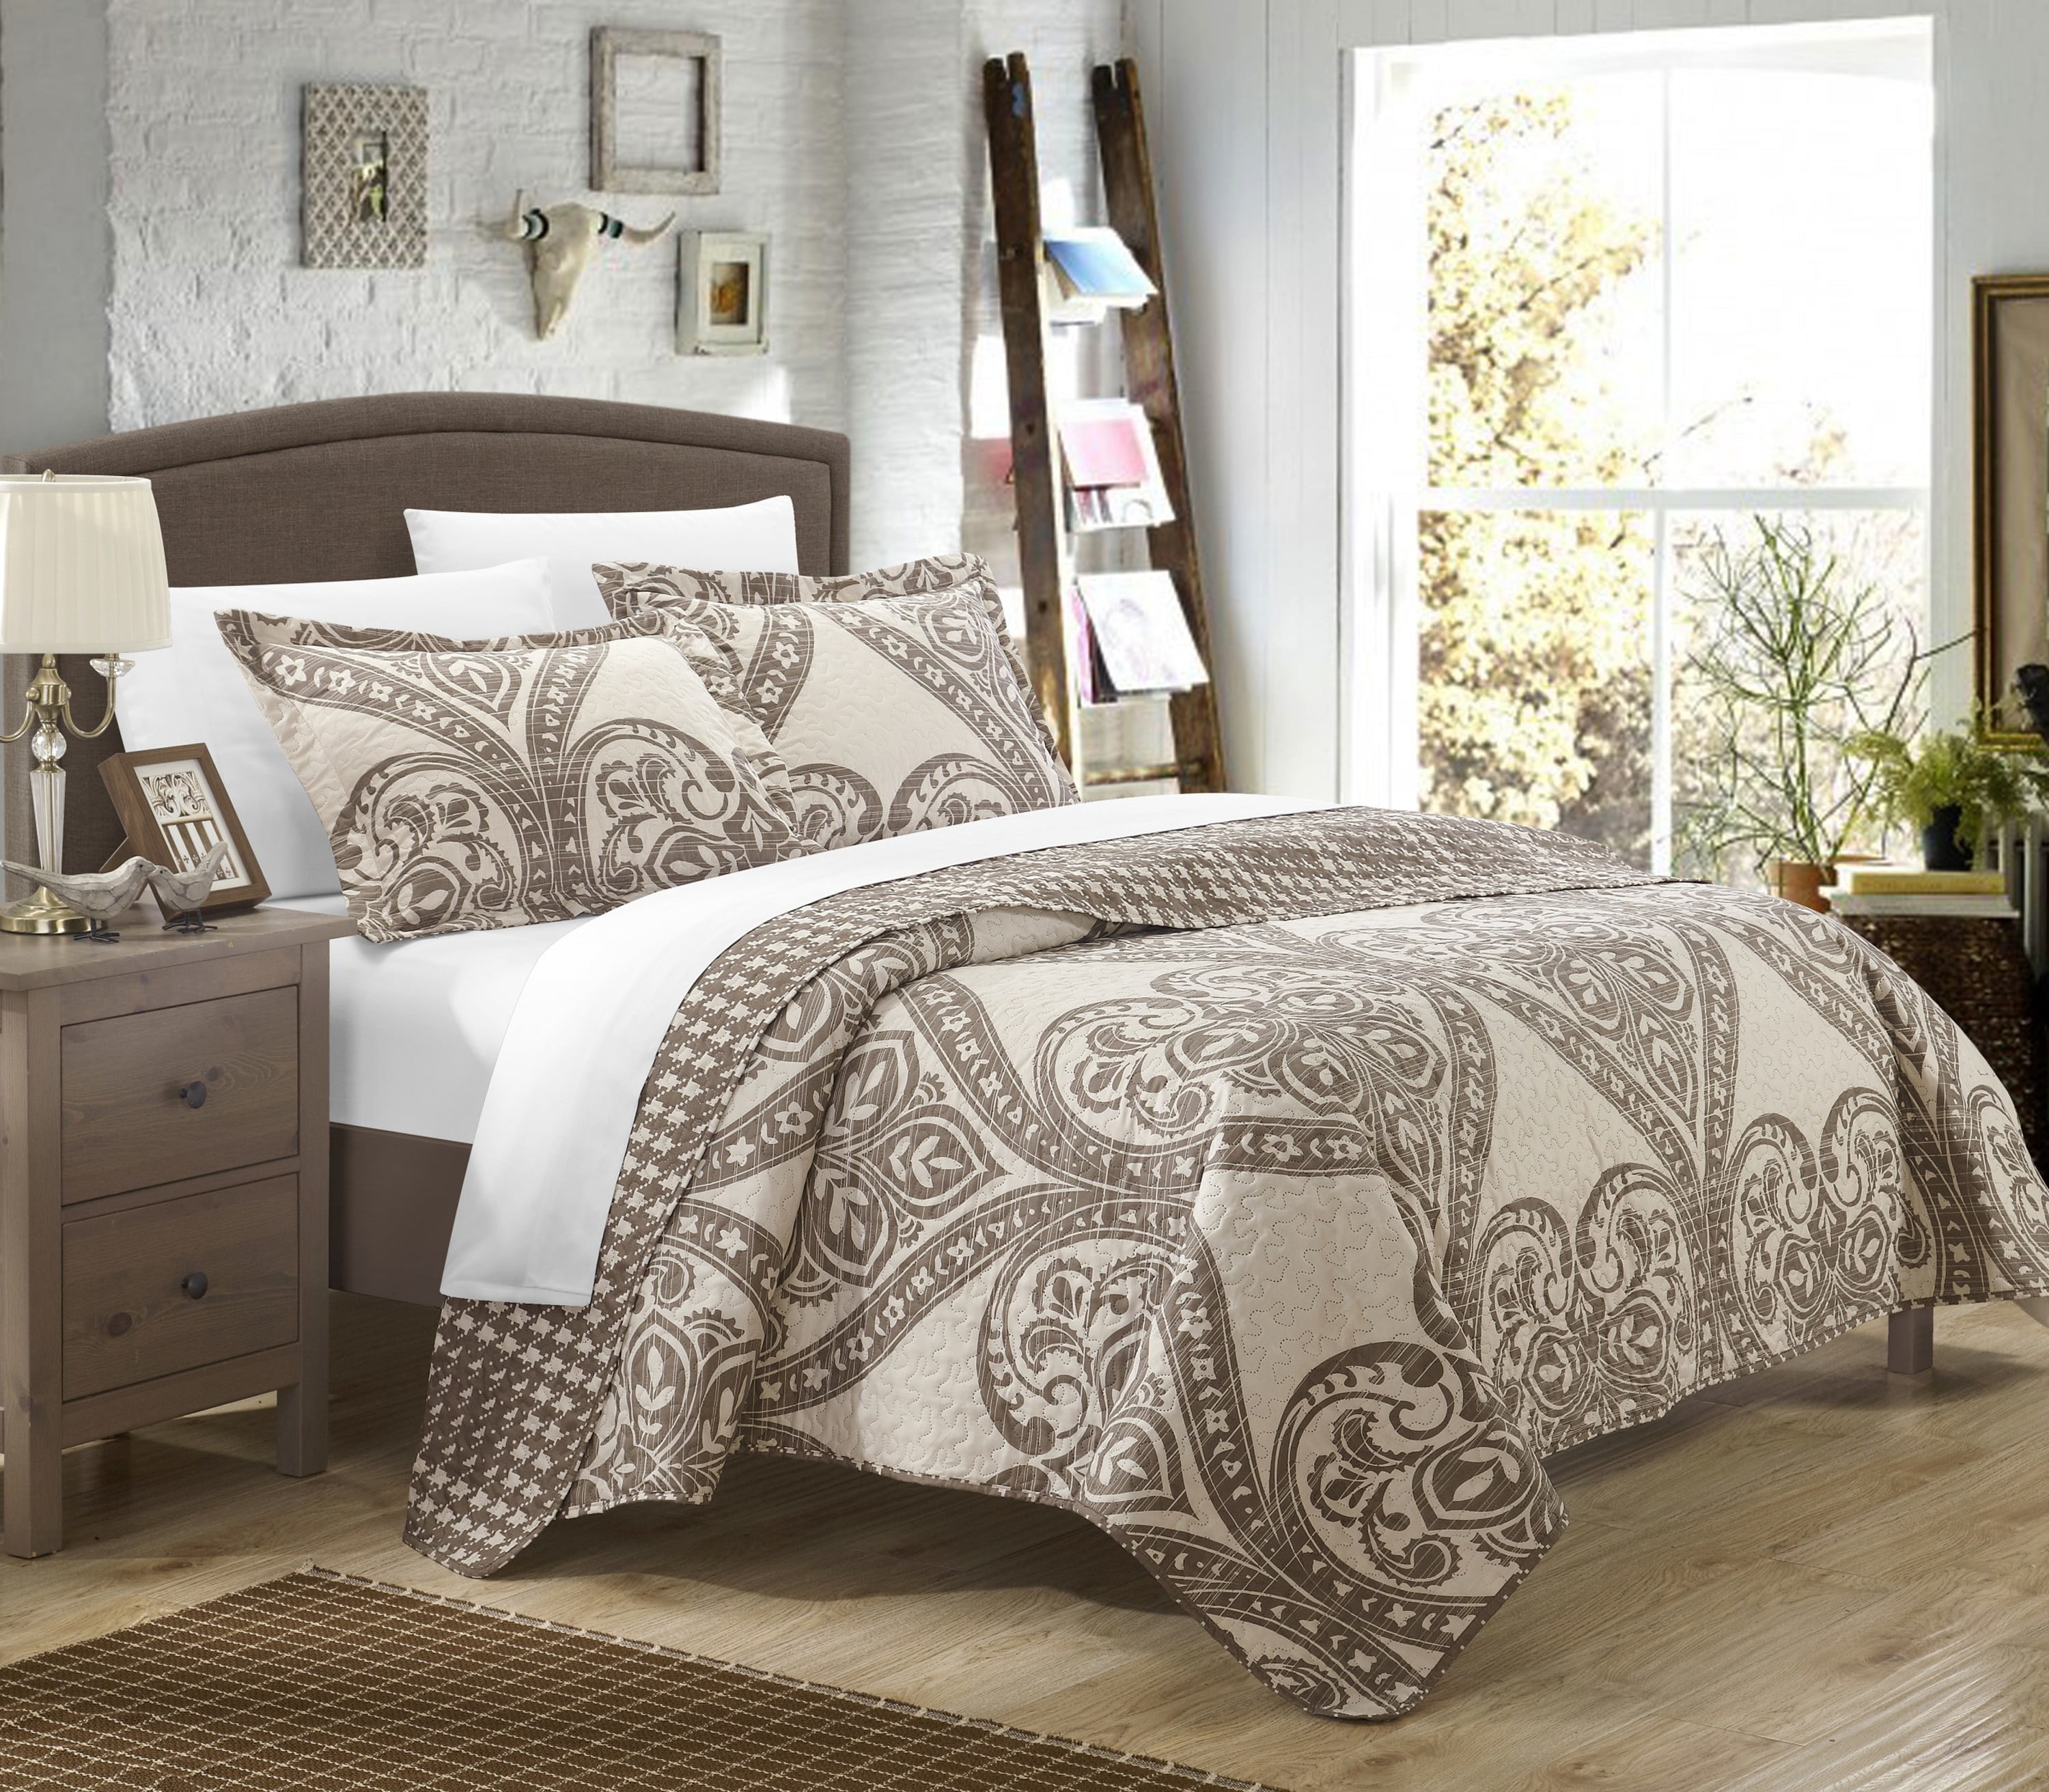 Details about   Chic Home Aquatic 8 Piece Reversible Comforter Life in The Sea Theme Print Desig 